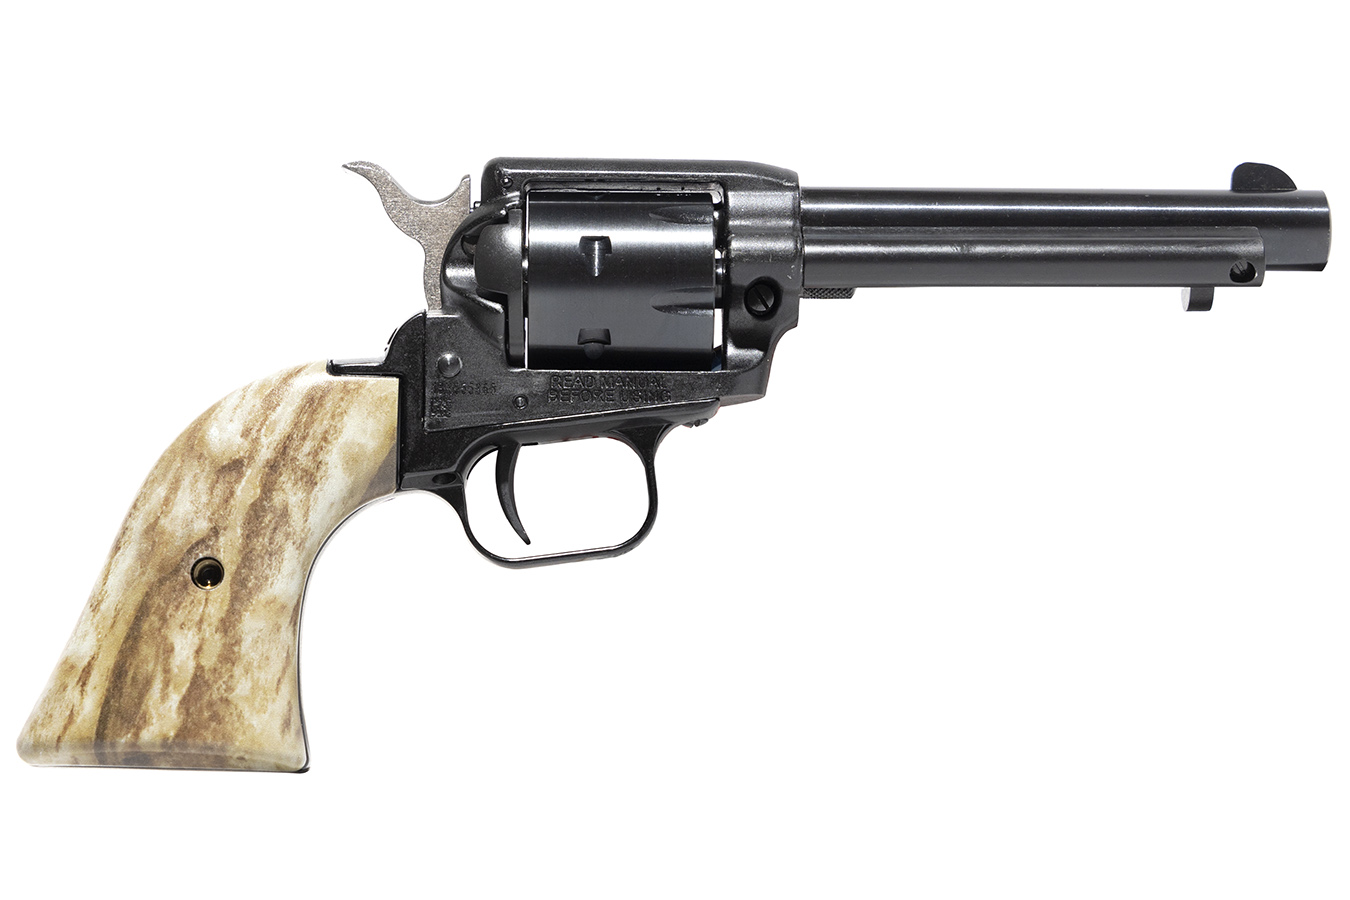 HERITAGE ROUGH RIDER 22LR REVOLVER WITH BLUED BARREL AND STAG GRIPS